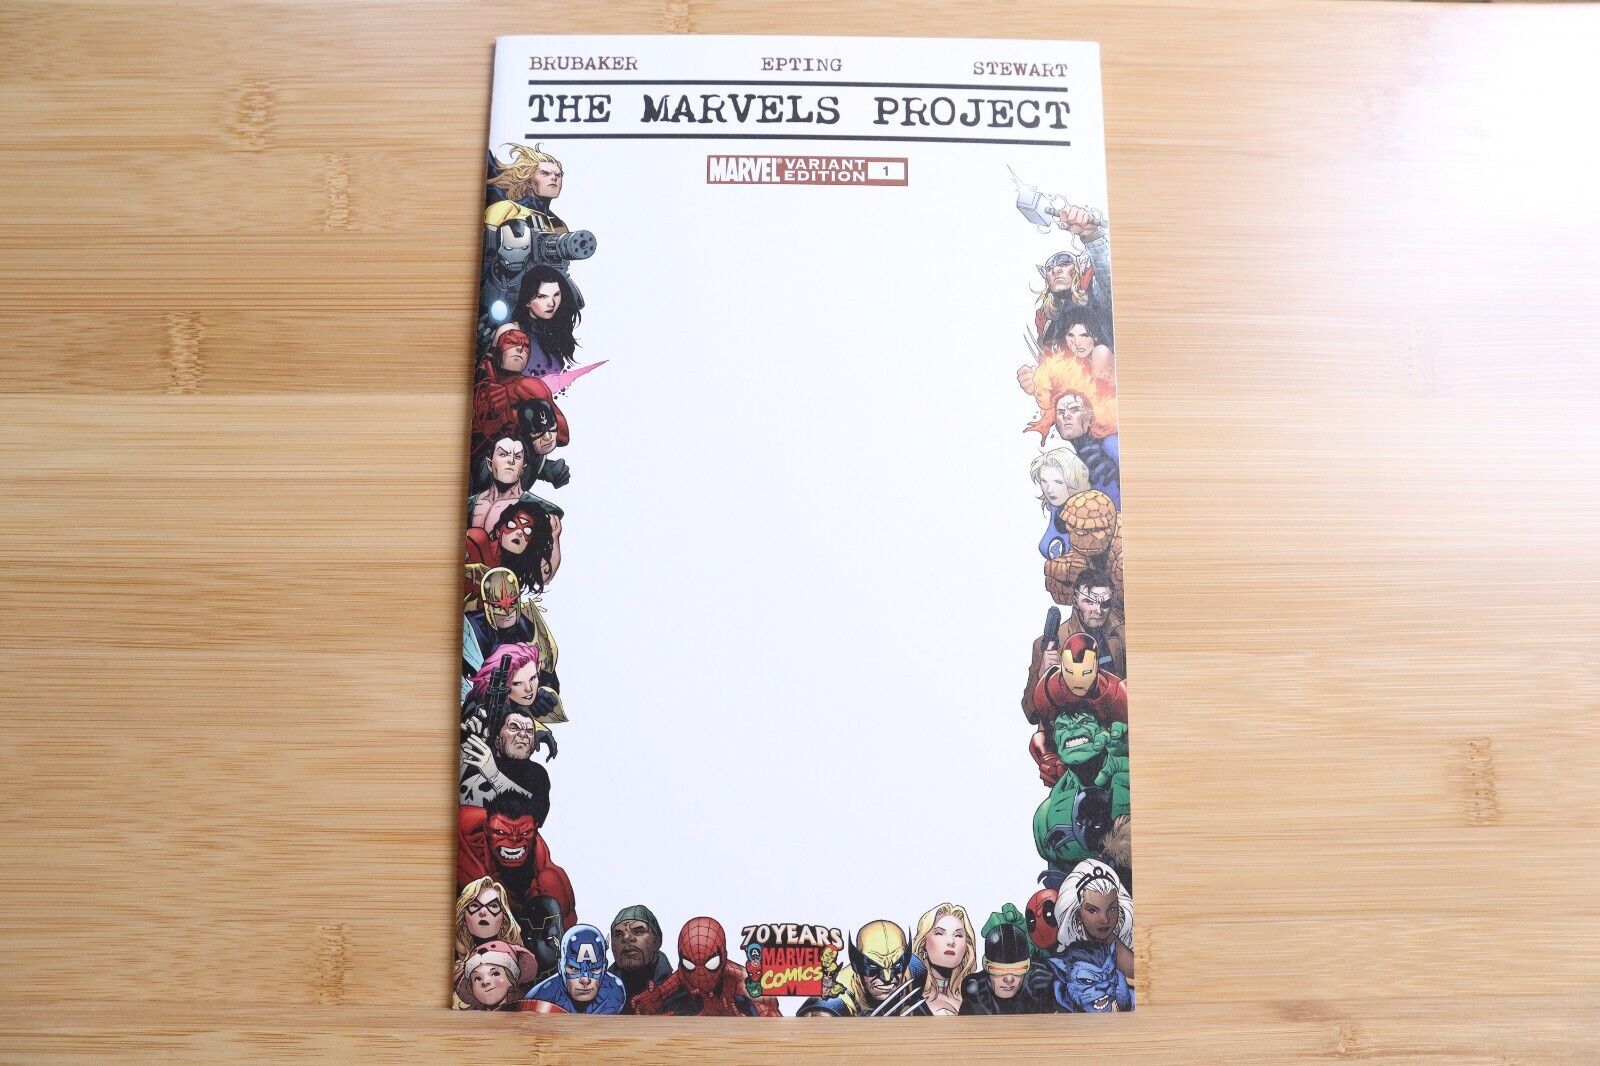 Marvels Project #1 Blank Frame Variant 70th Anniversary Frame NM - 2009